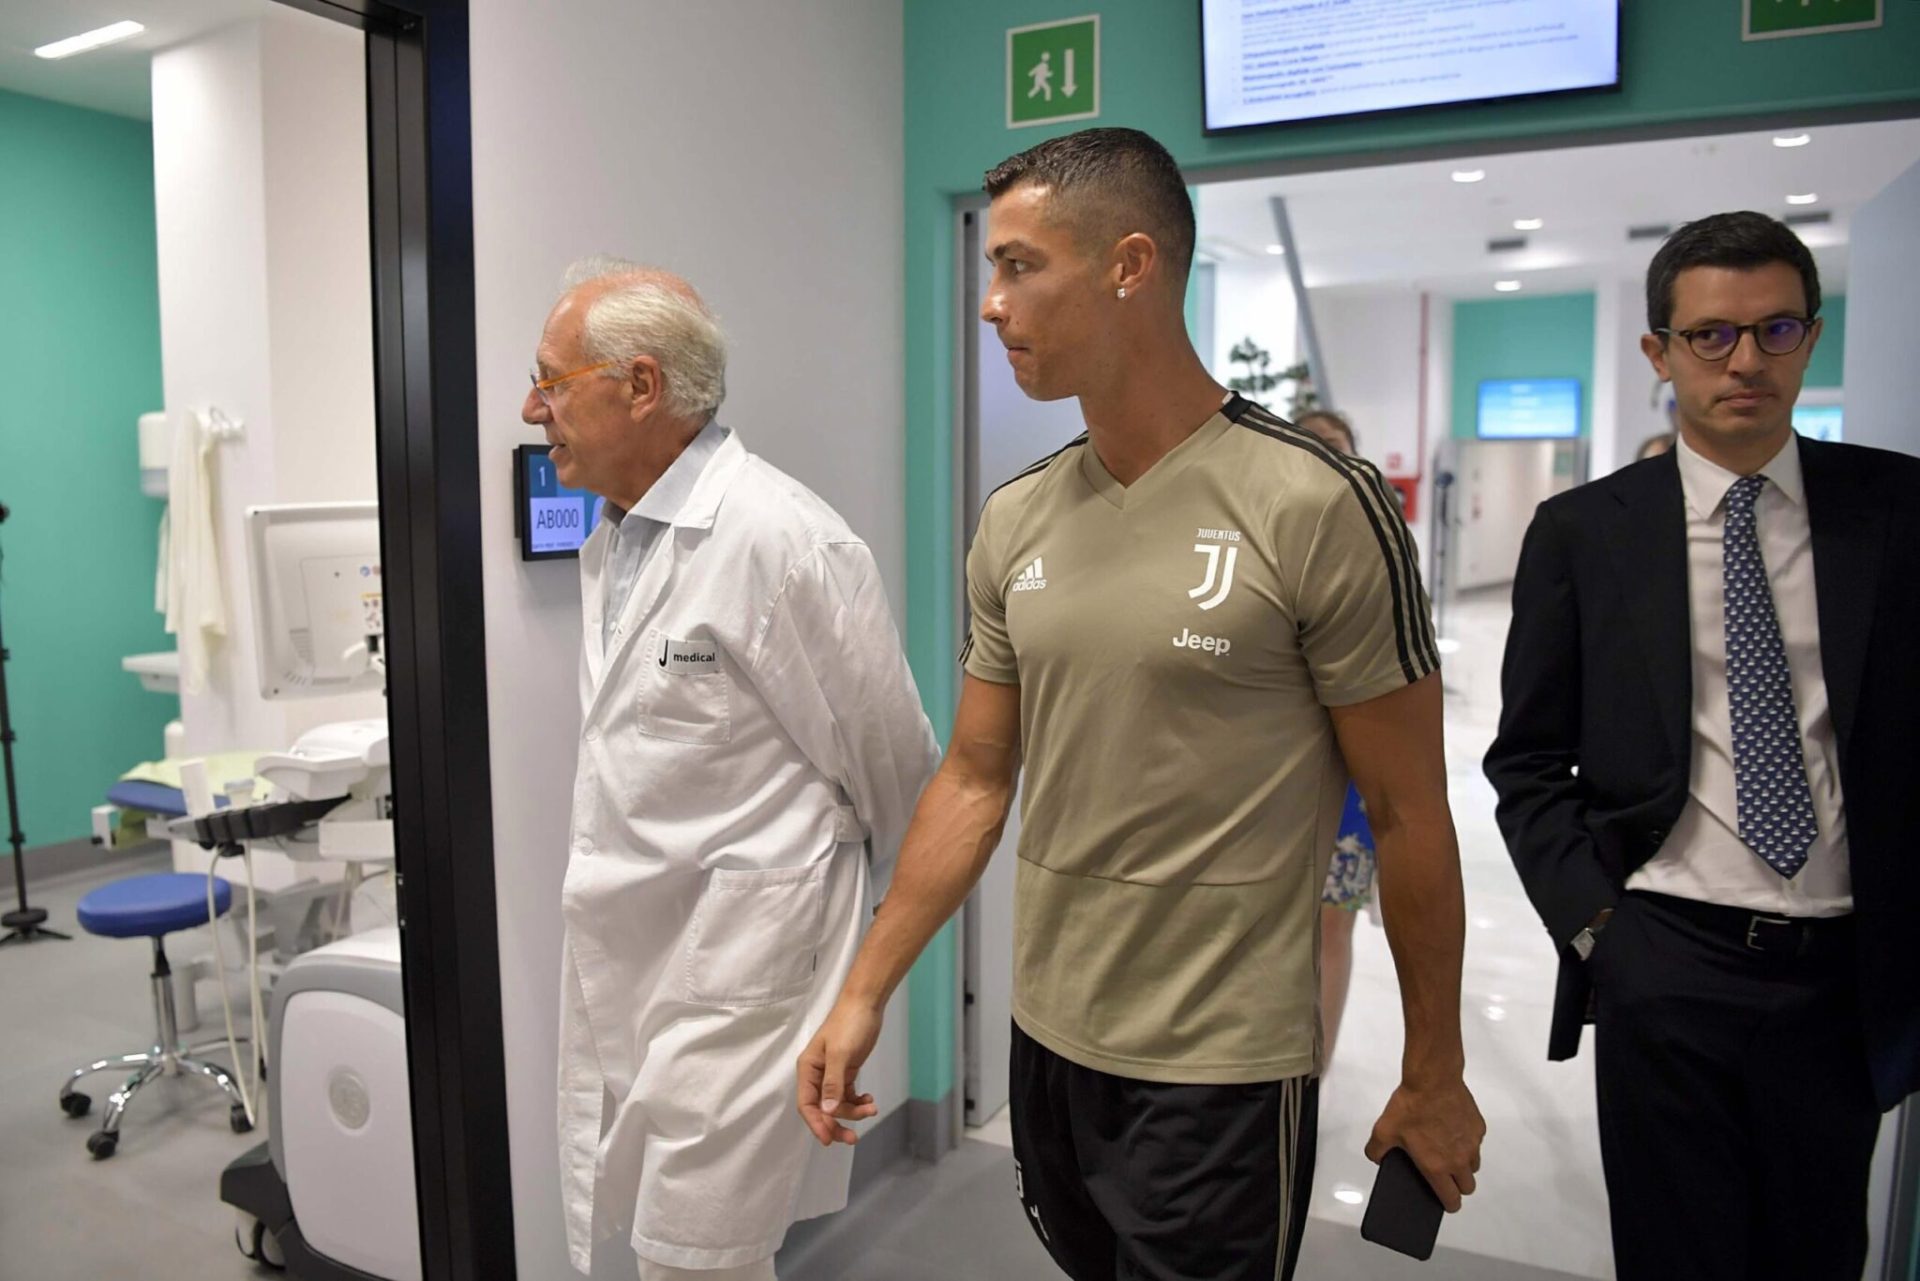 UEFA Rule Confirms The Fears That Cristiano Ronaldo Might Miss UCL